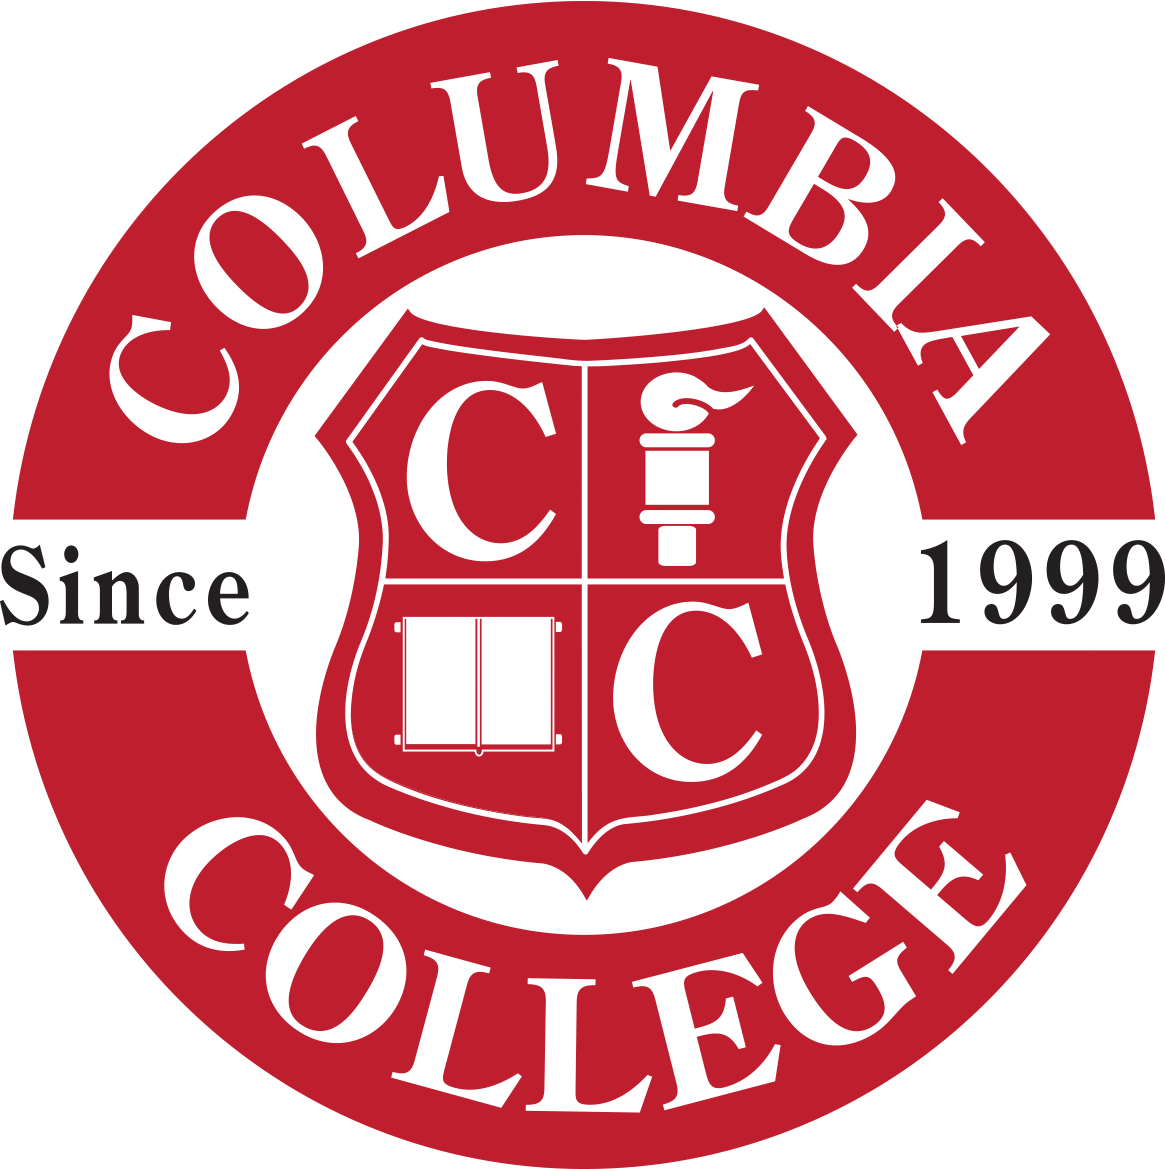 Columbia College Official Since 1999 logo